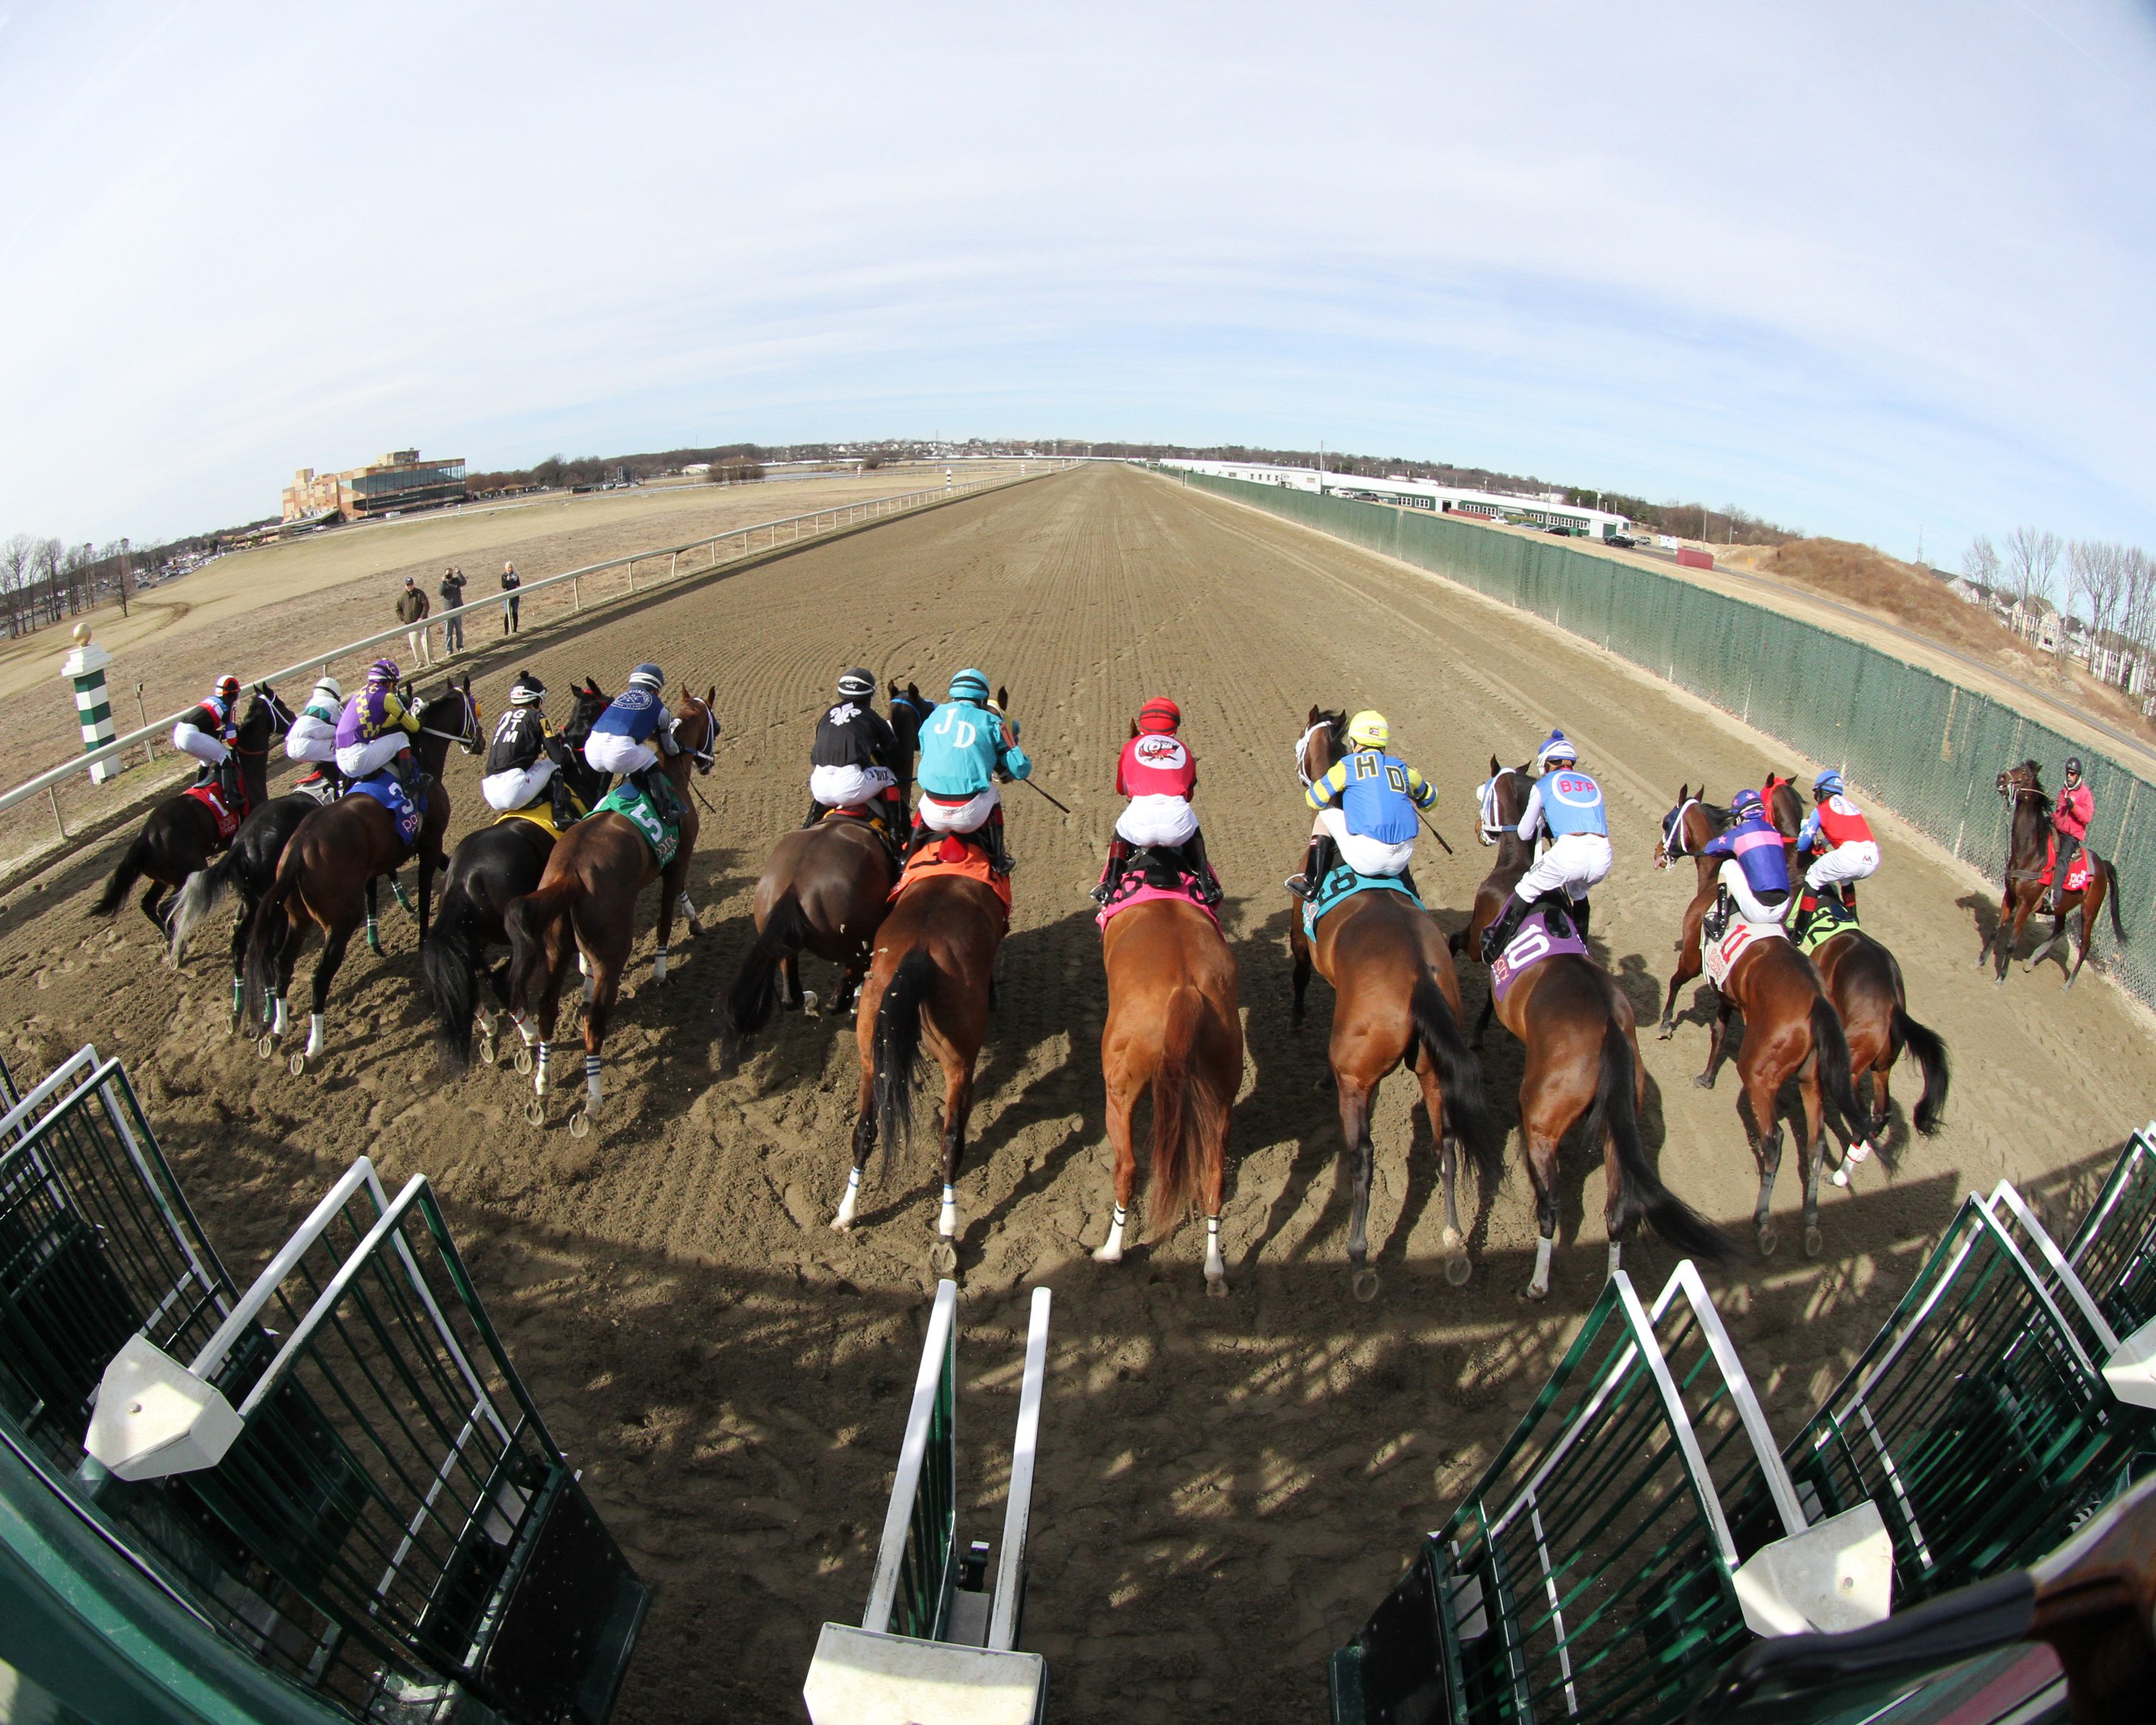 The start of Race 3 at Parx on March 8, 2022. Photo By: Chad B. Harmon